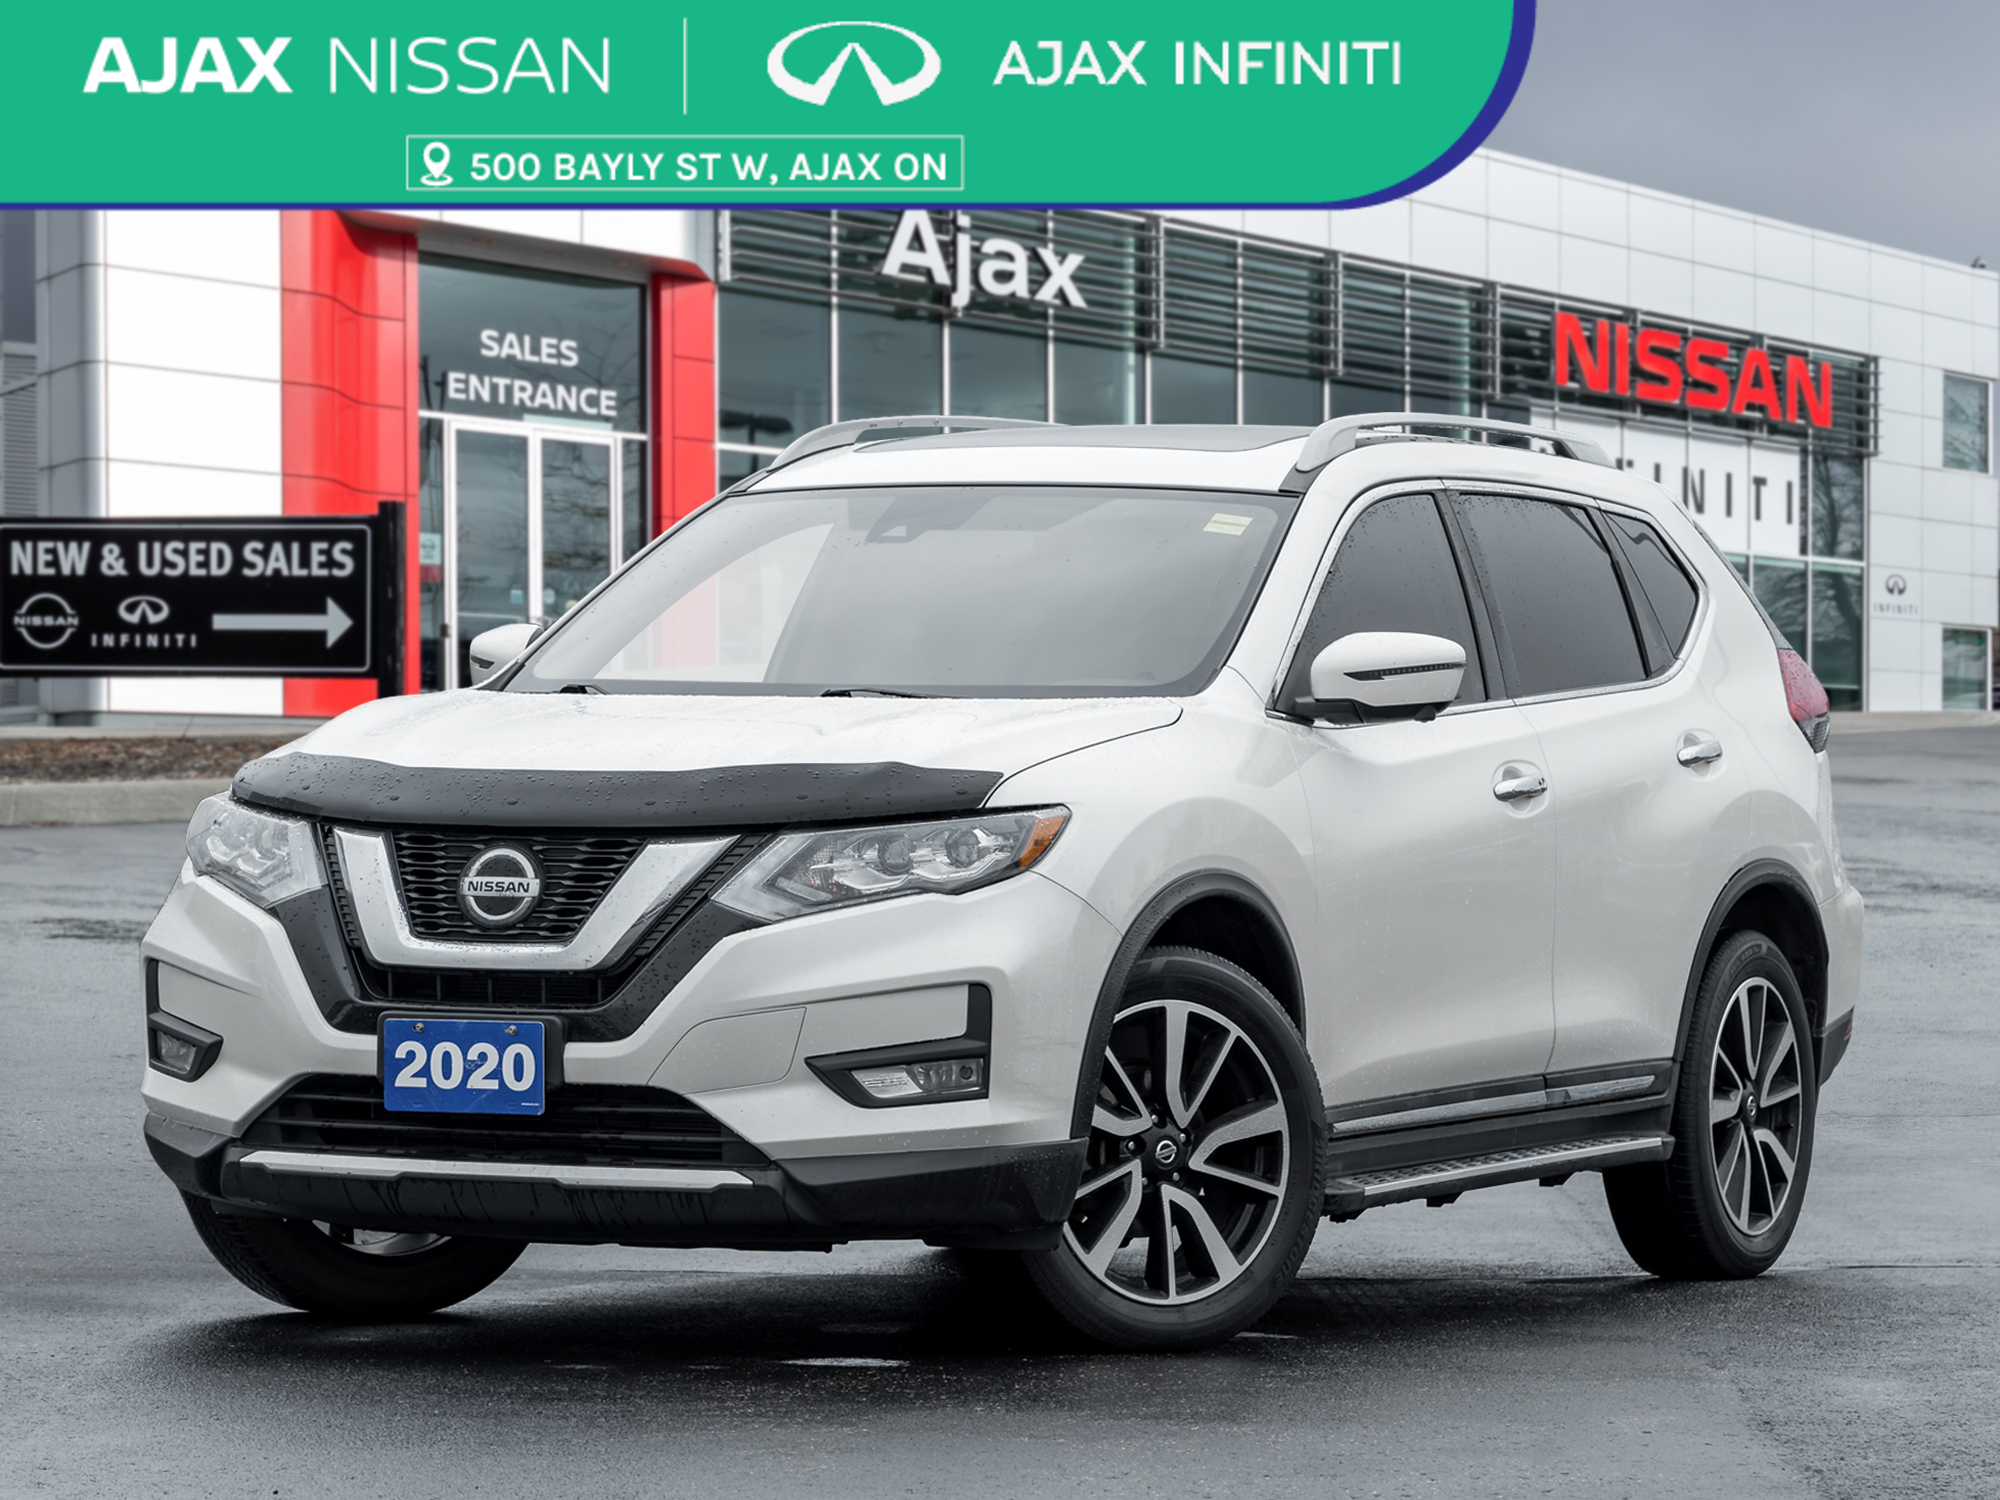 2020 Nissan Rogue FULLY LOADED! LEATHER | POWER TAILGATE | NAVIGATIO